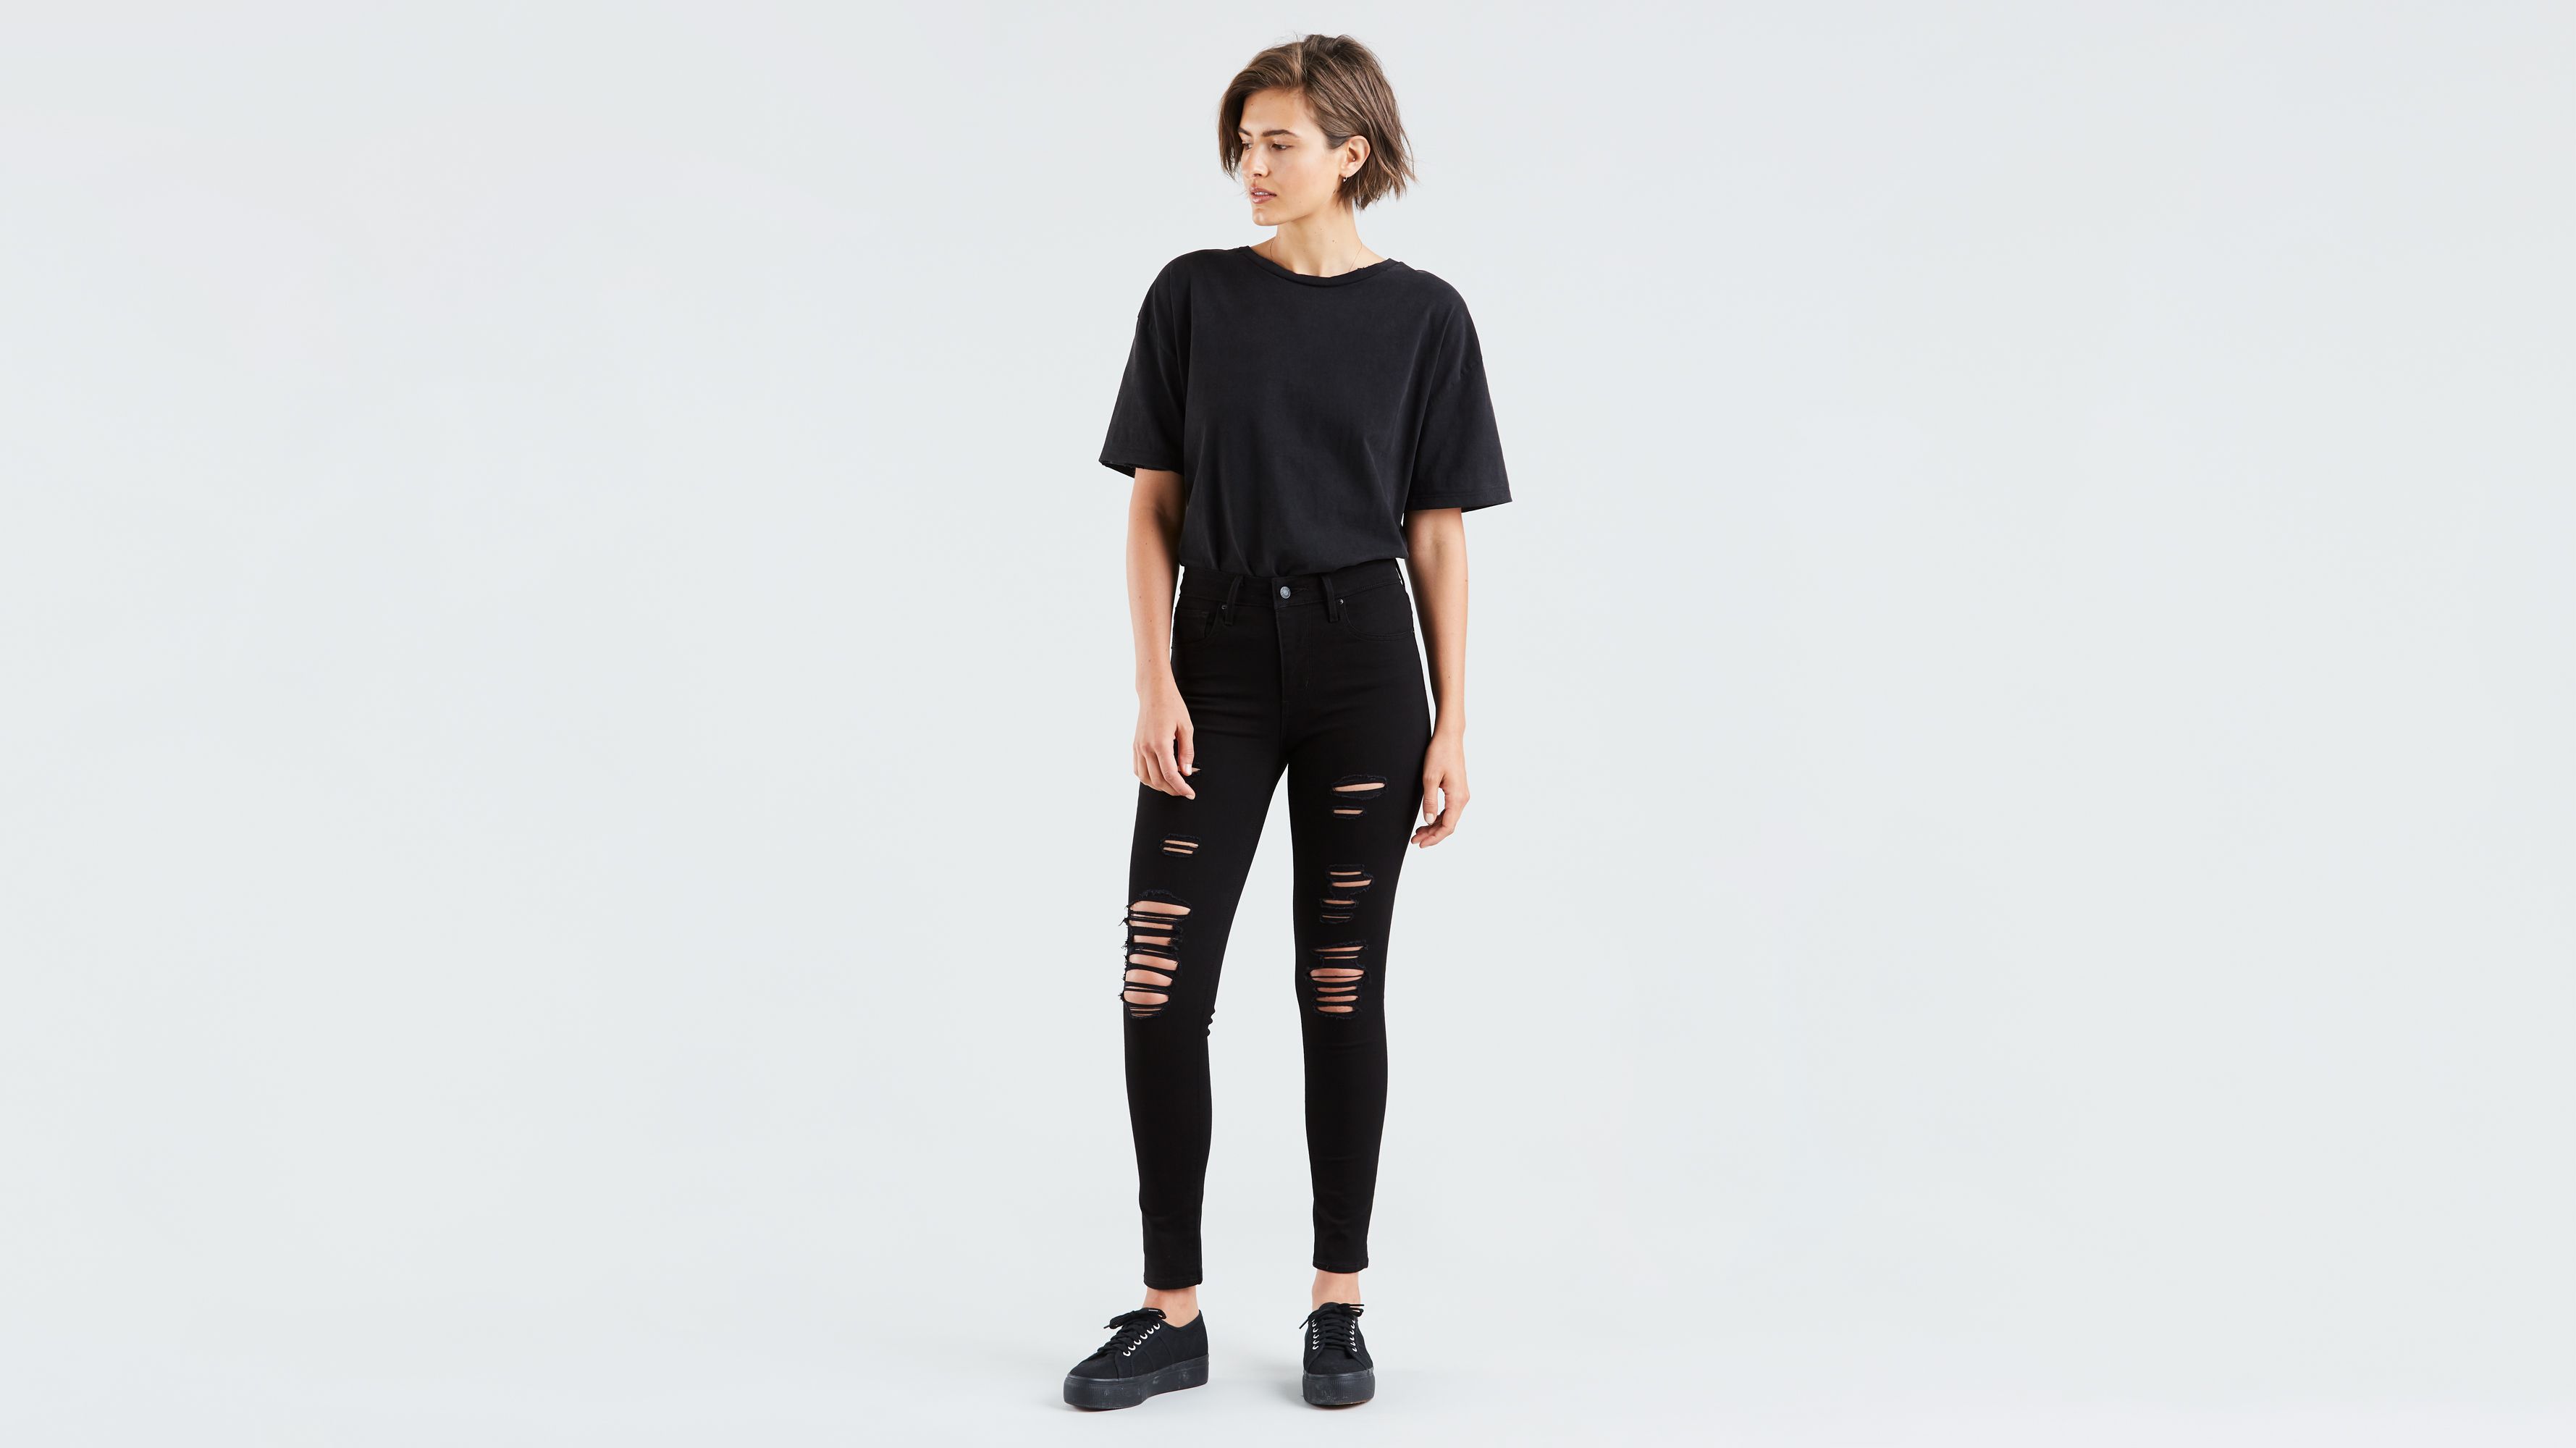 black ripped jeans womens levis